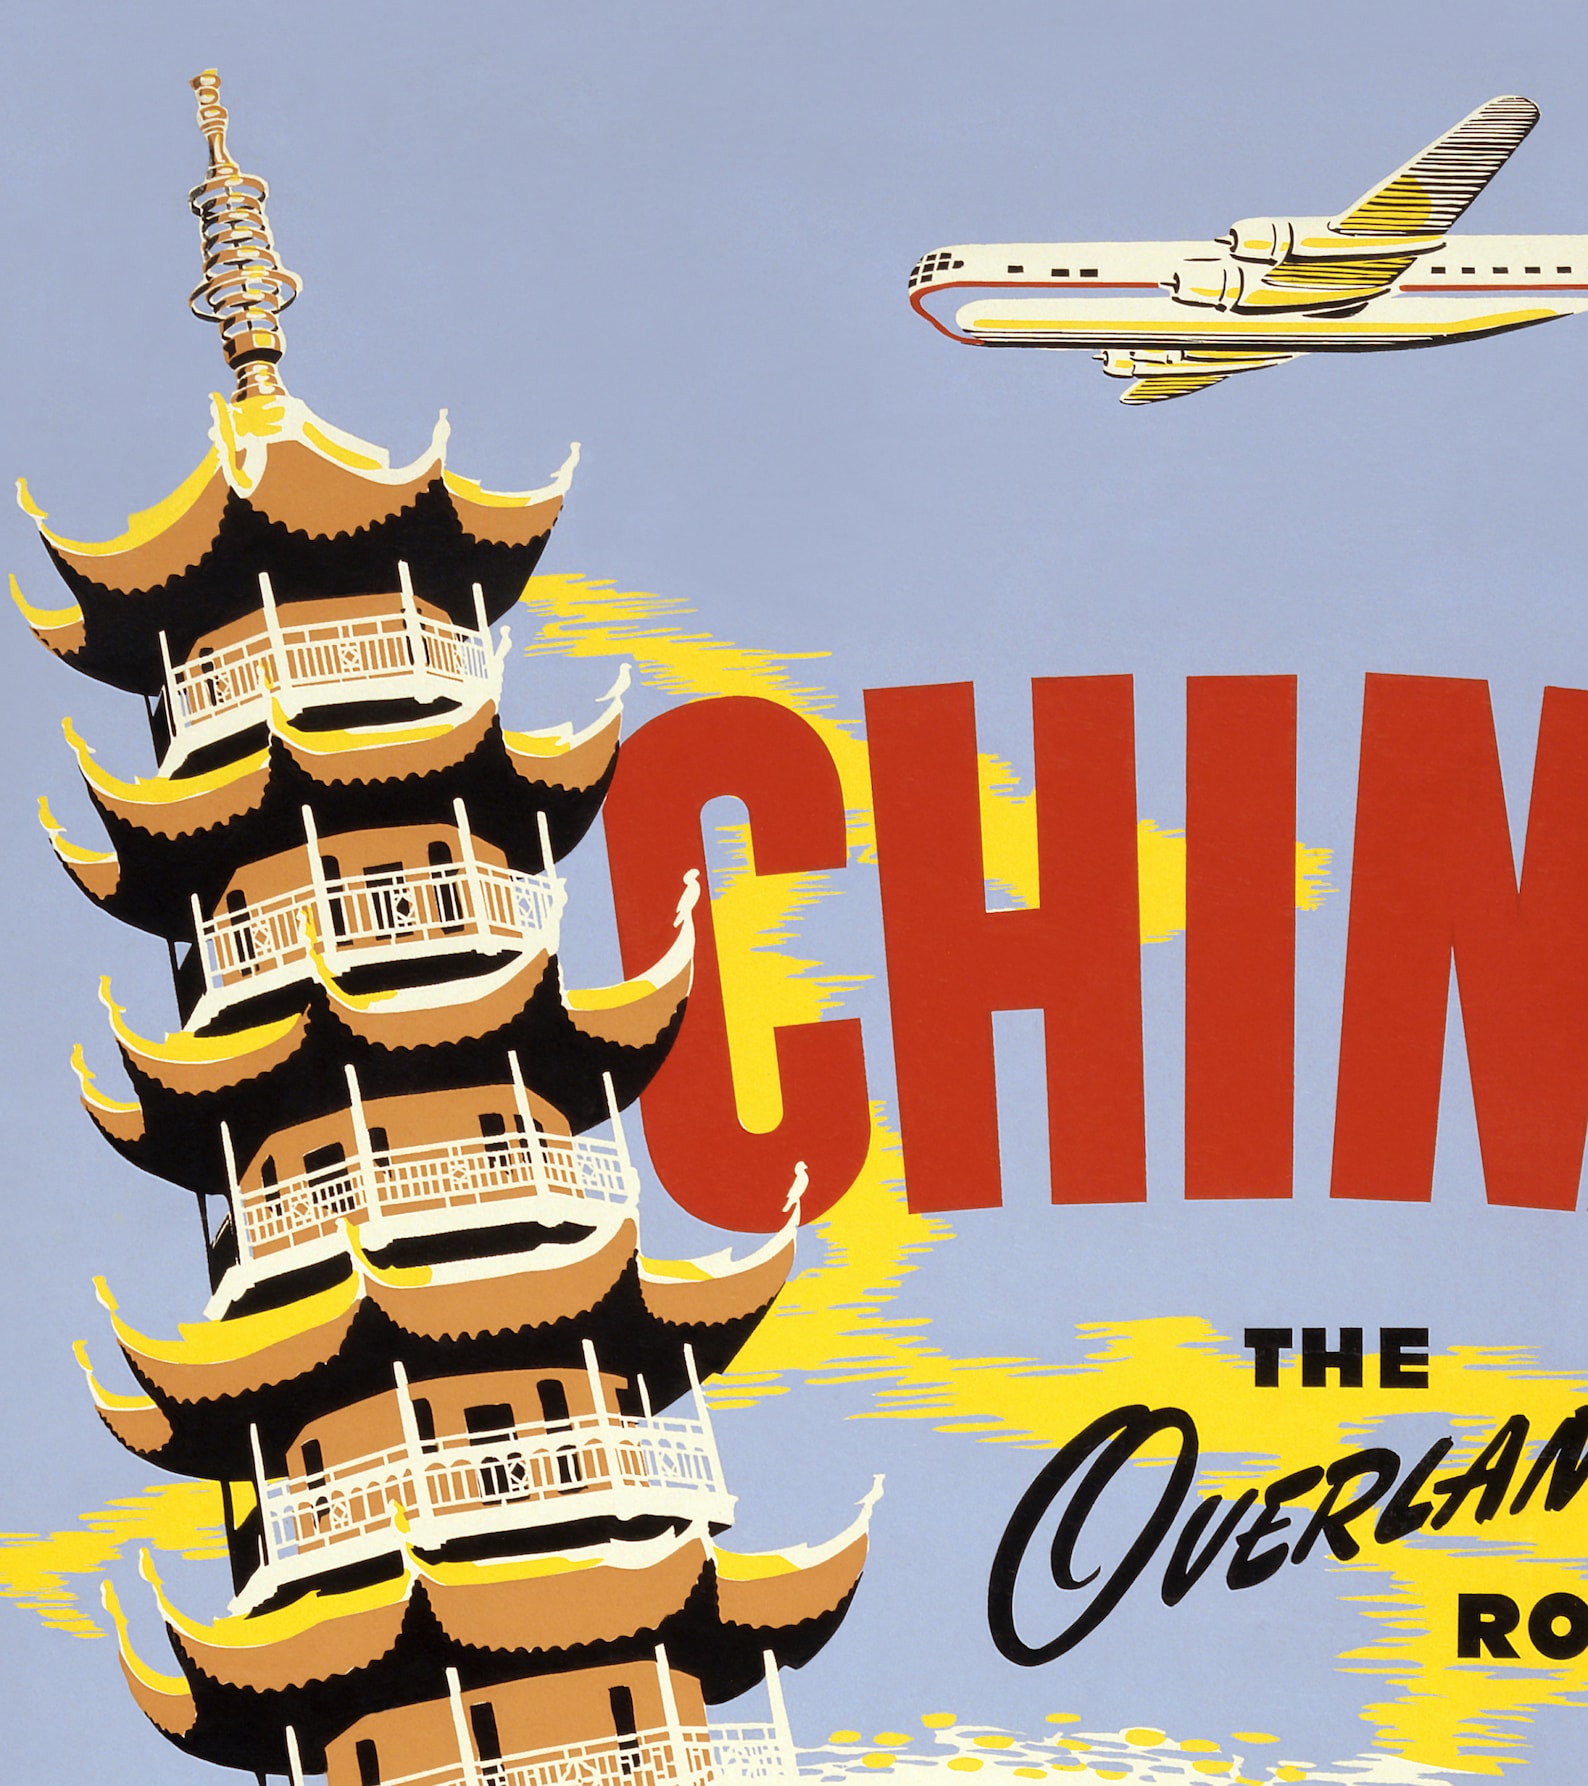 chinese travel poster